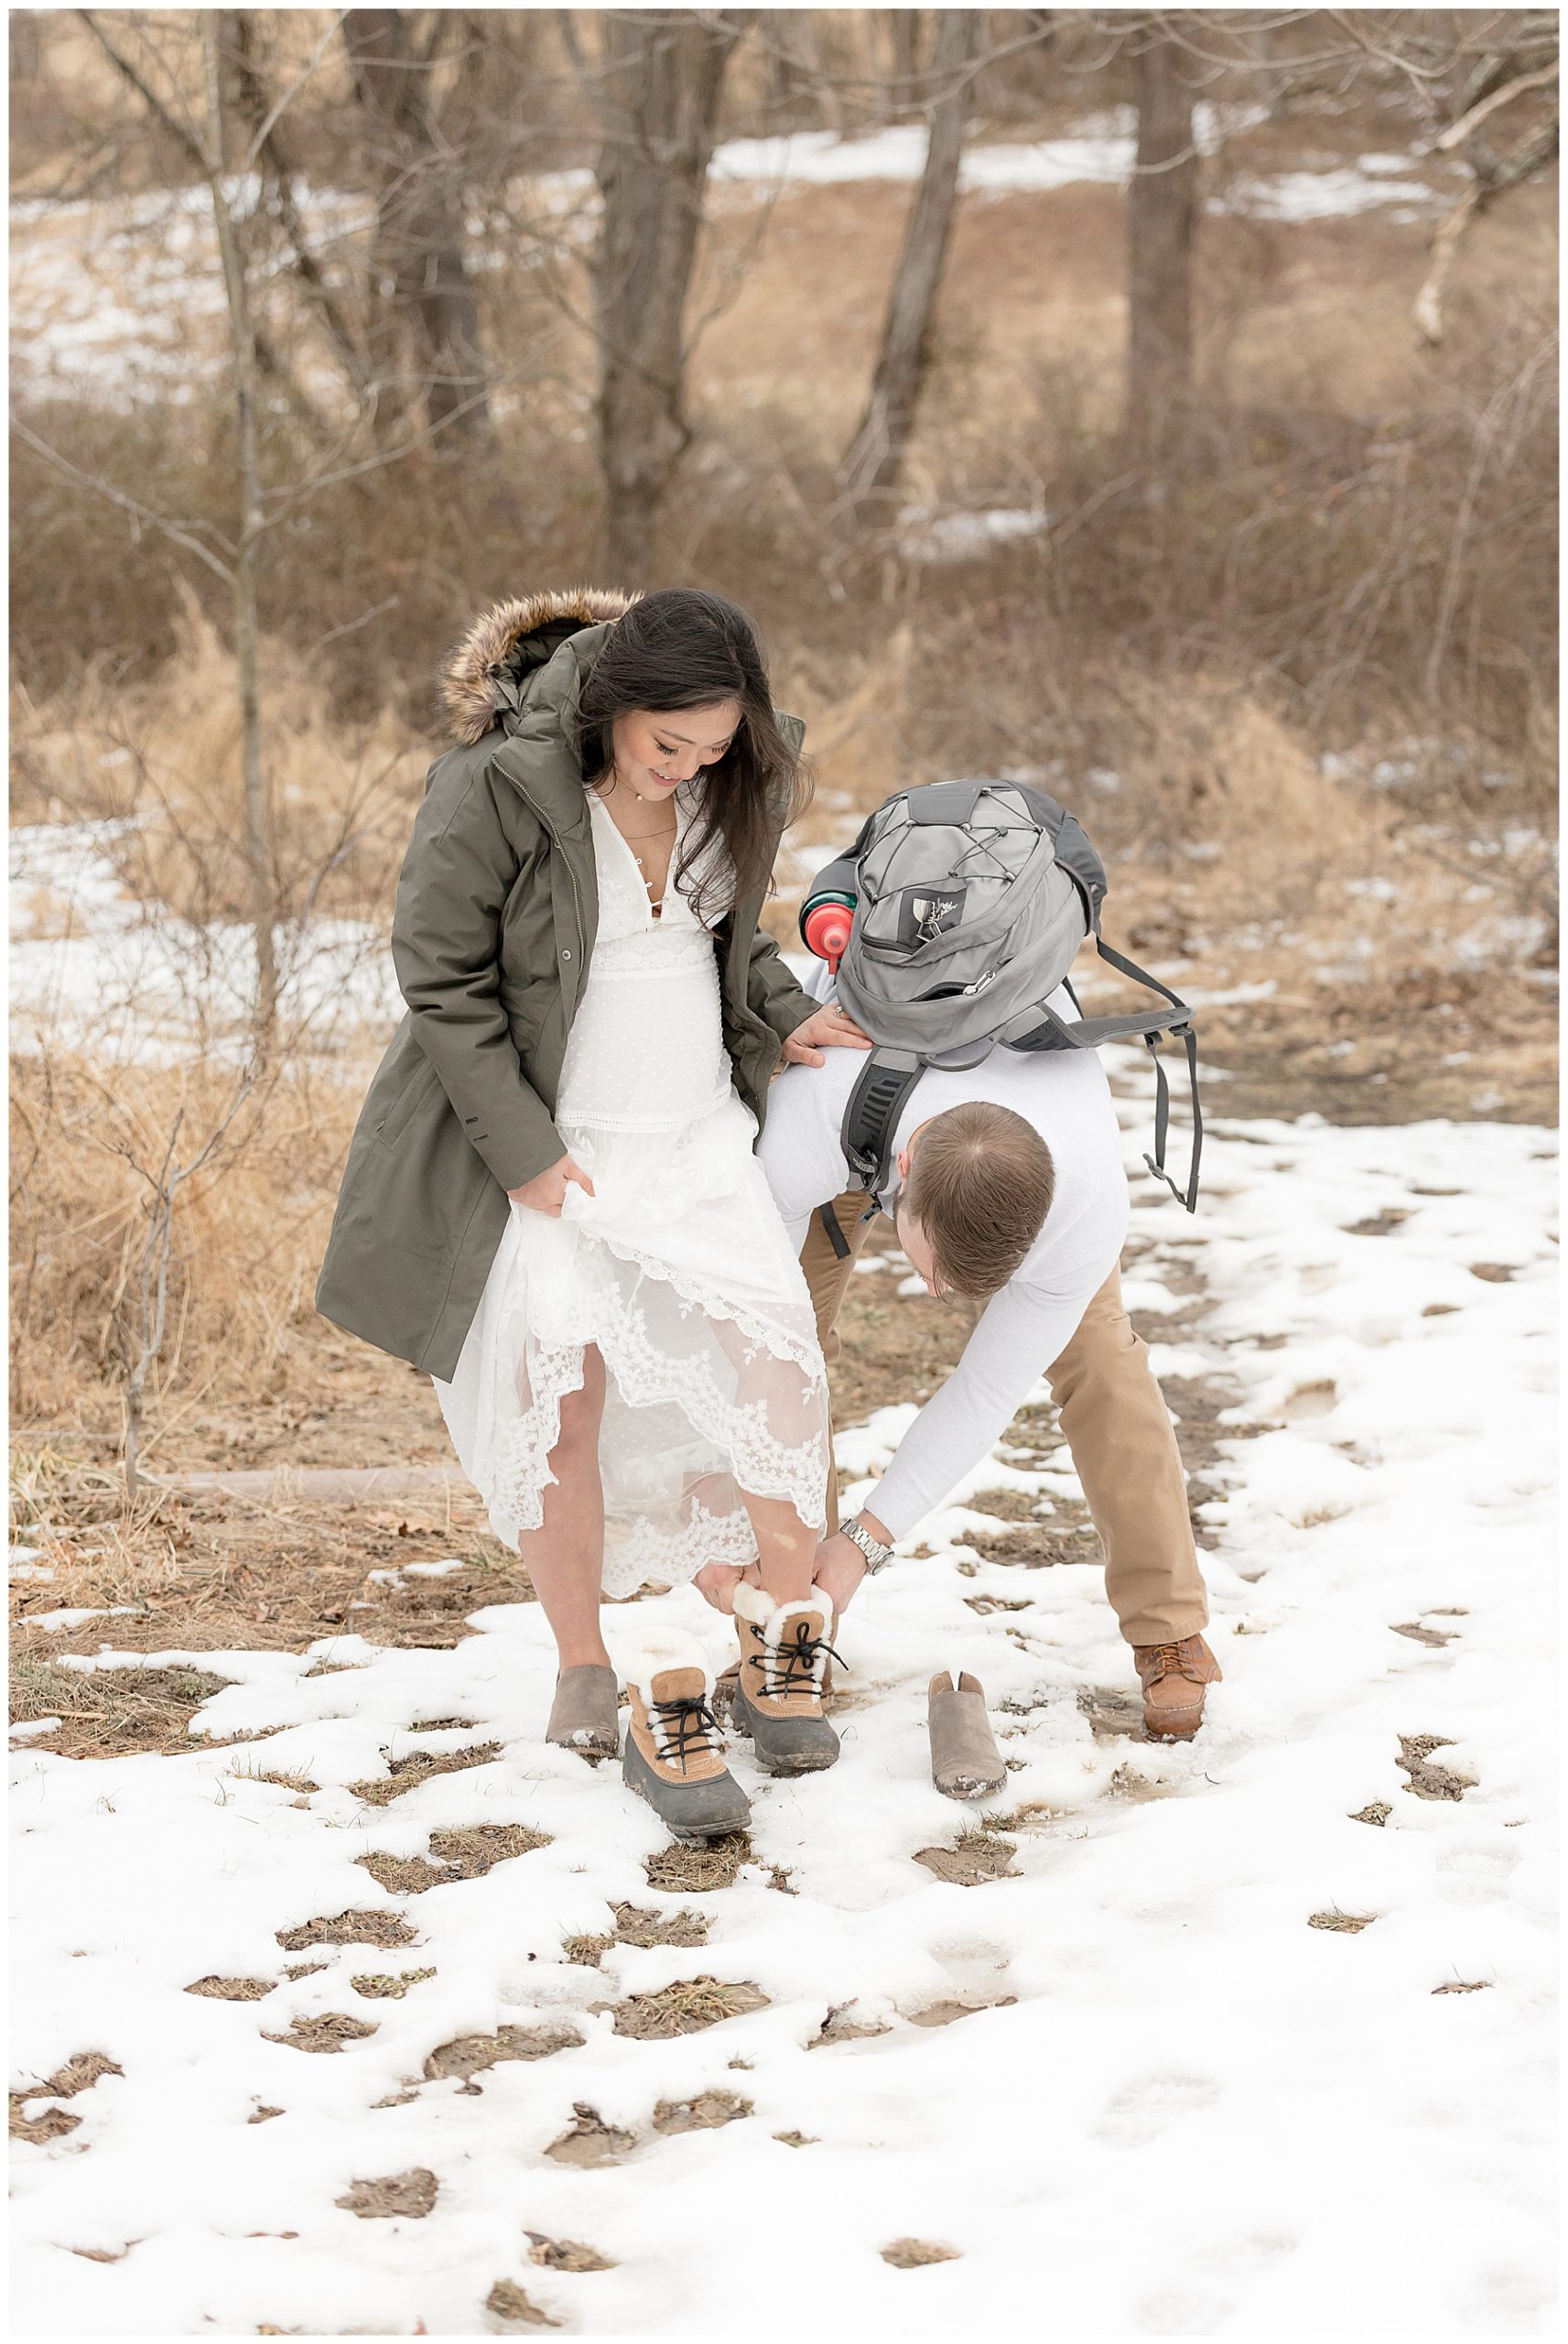 Winter Maternity Photos at the Howard County Conservancy means frozen toes